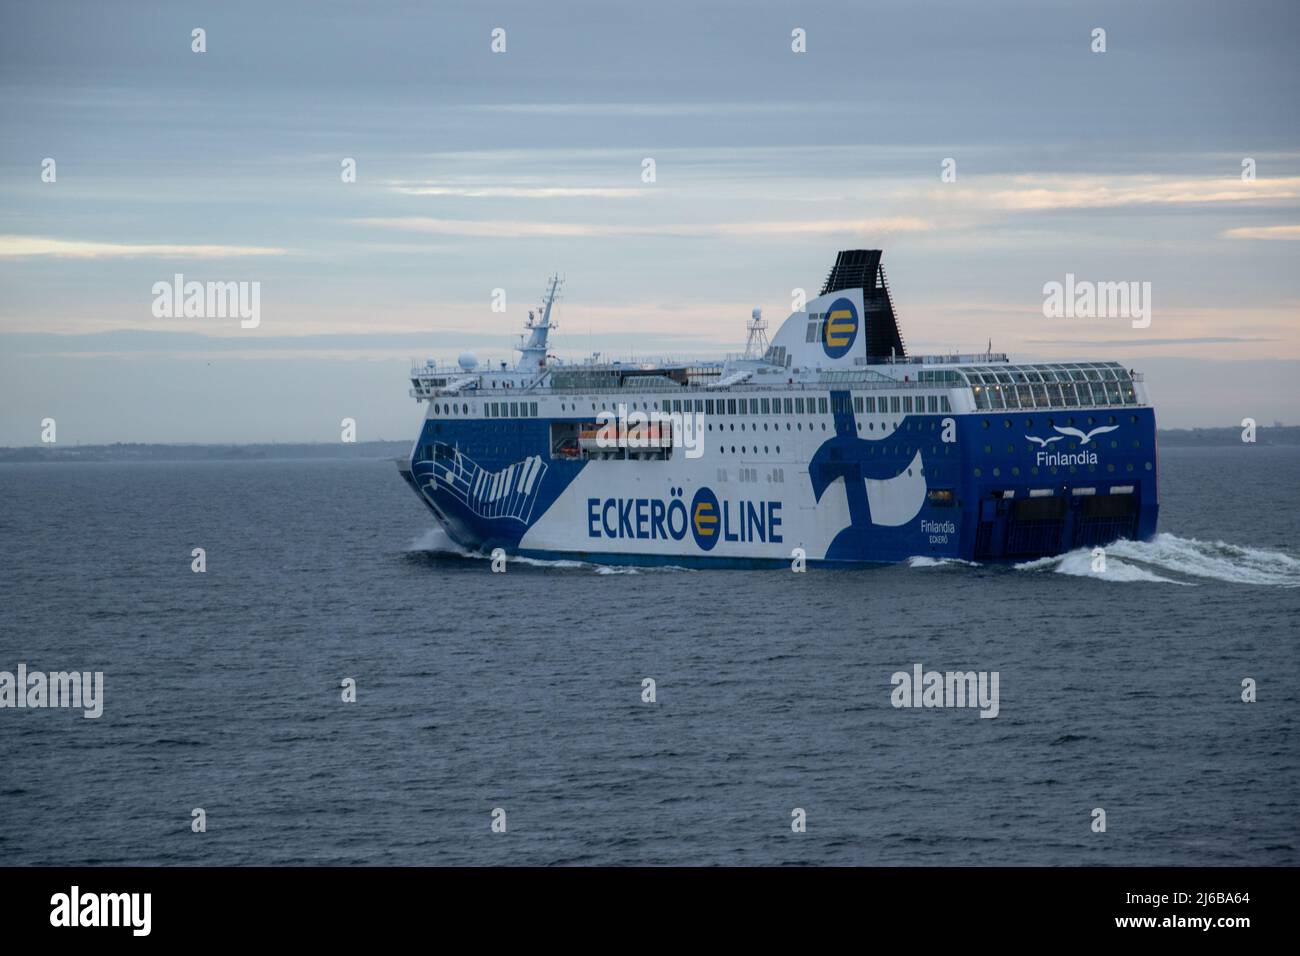 MS Finlandia is a cruiseferry owned and operated by the Finnish ferry operator Eckerö Line. The ship operates between Tallinn and Helsinki. Stock Photo